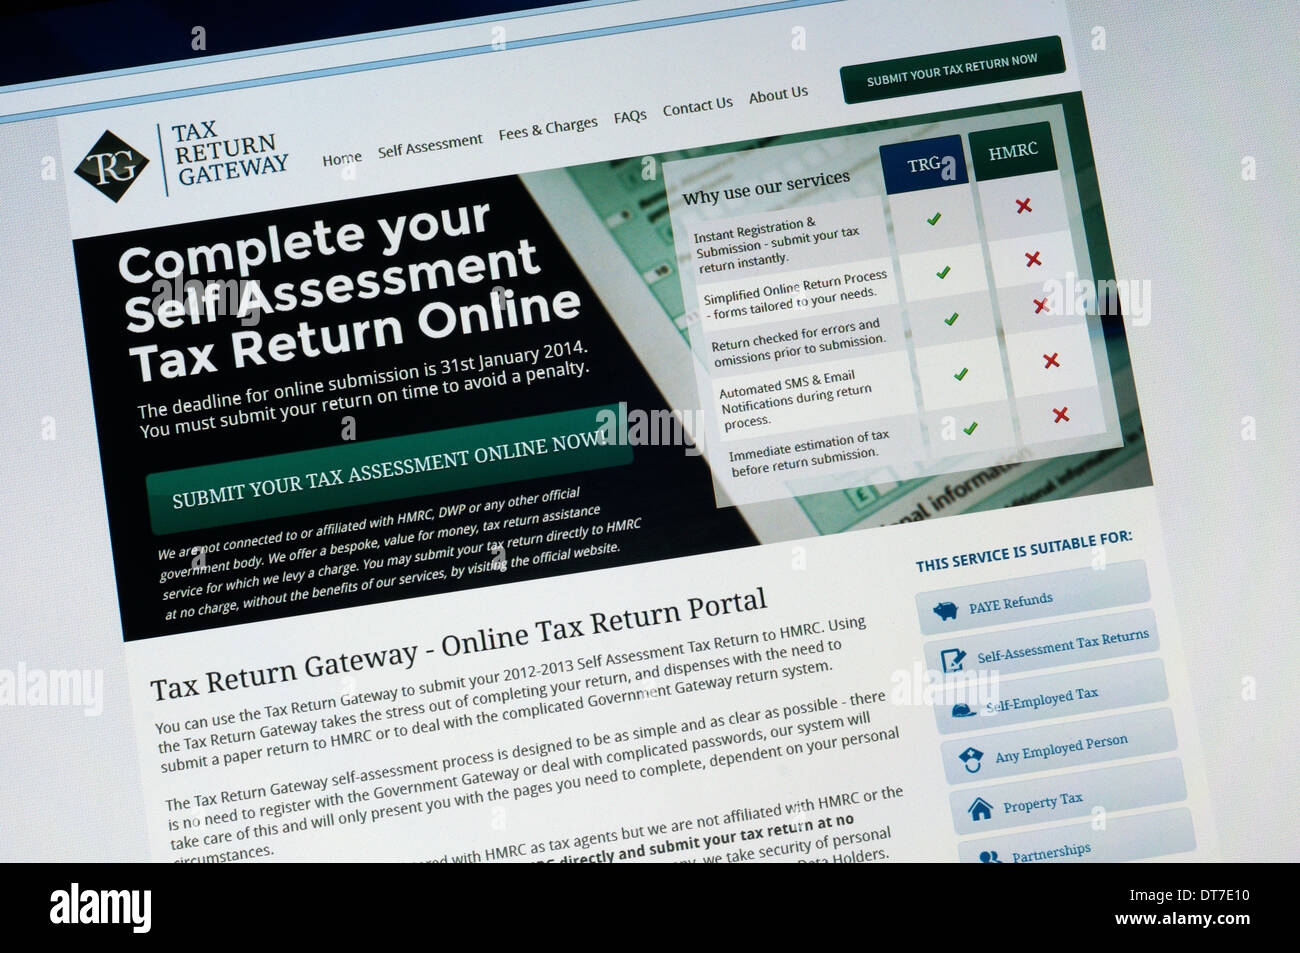 Home page of Tax Return Gateway web site - not an official Government site. Stock Photo